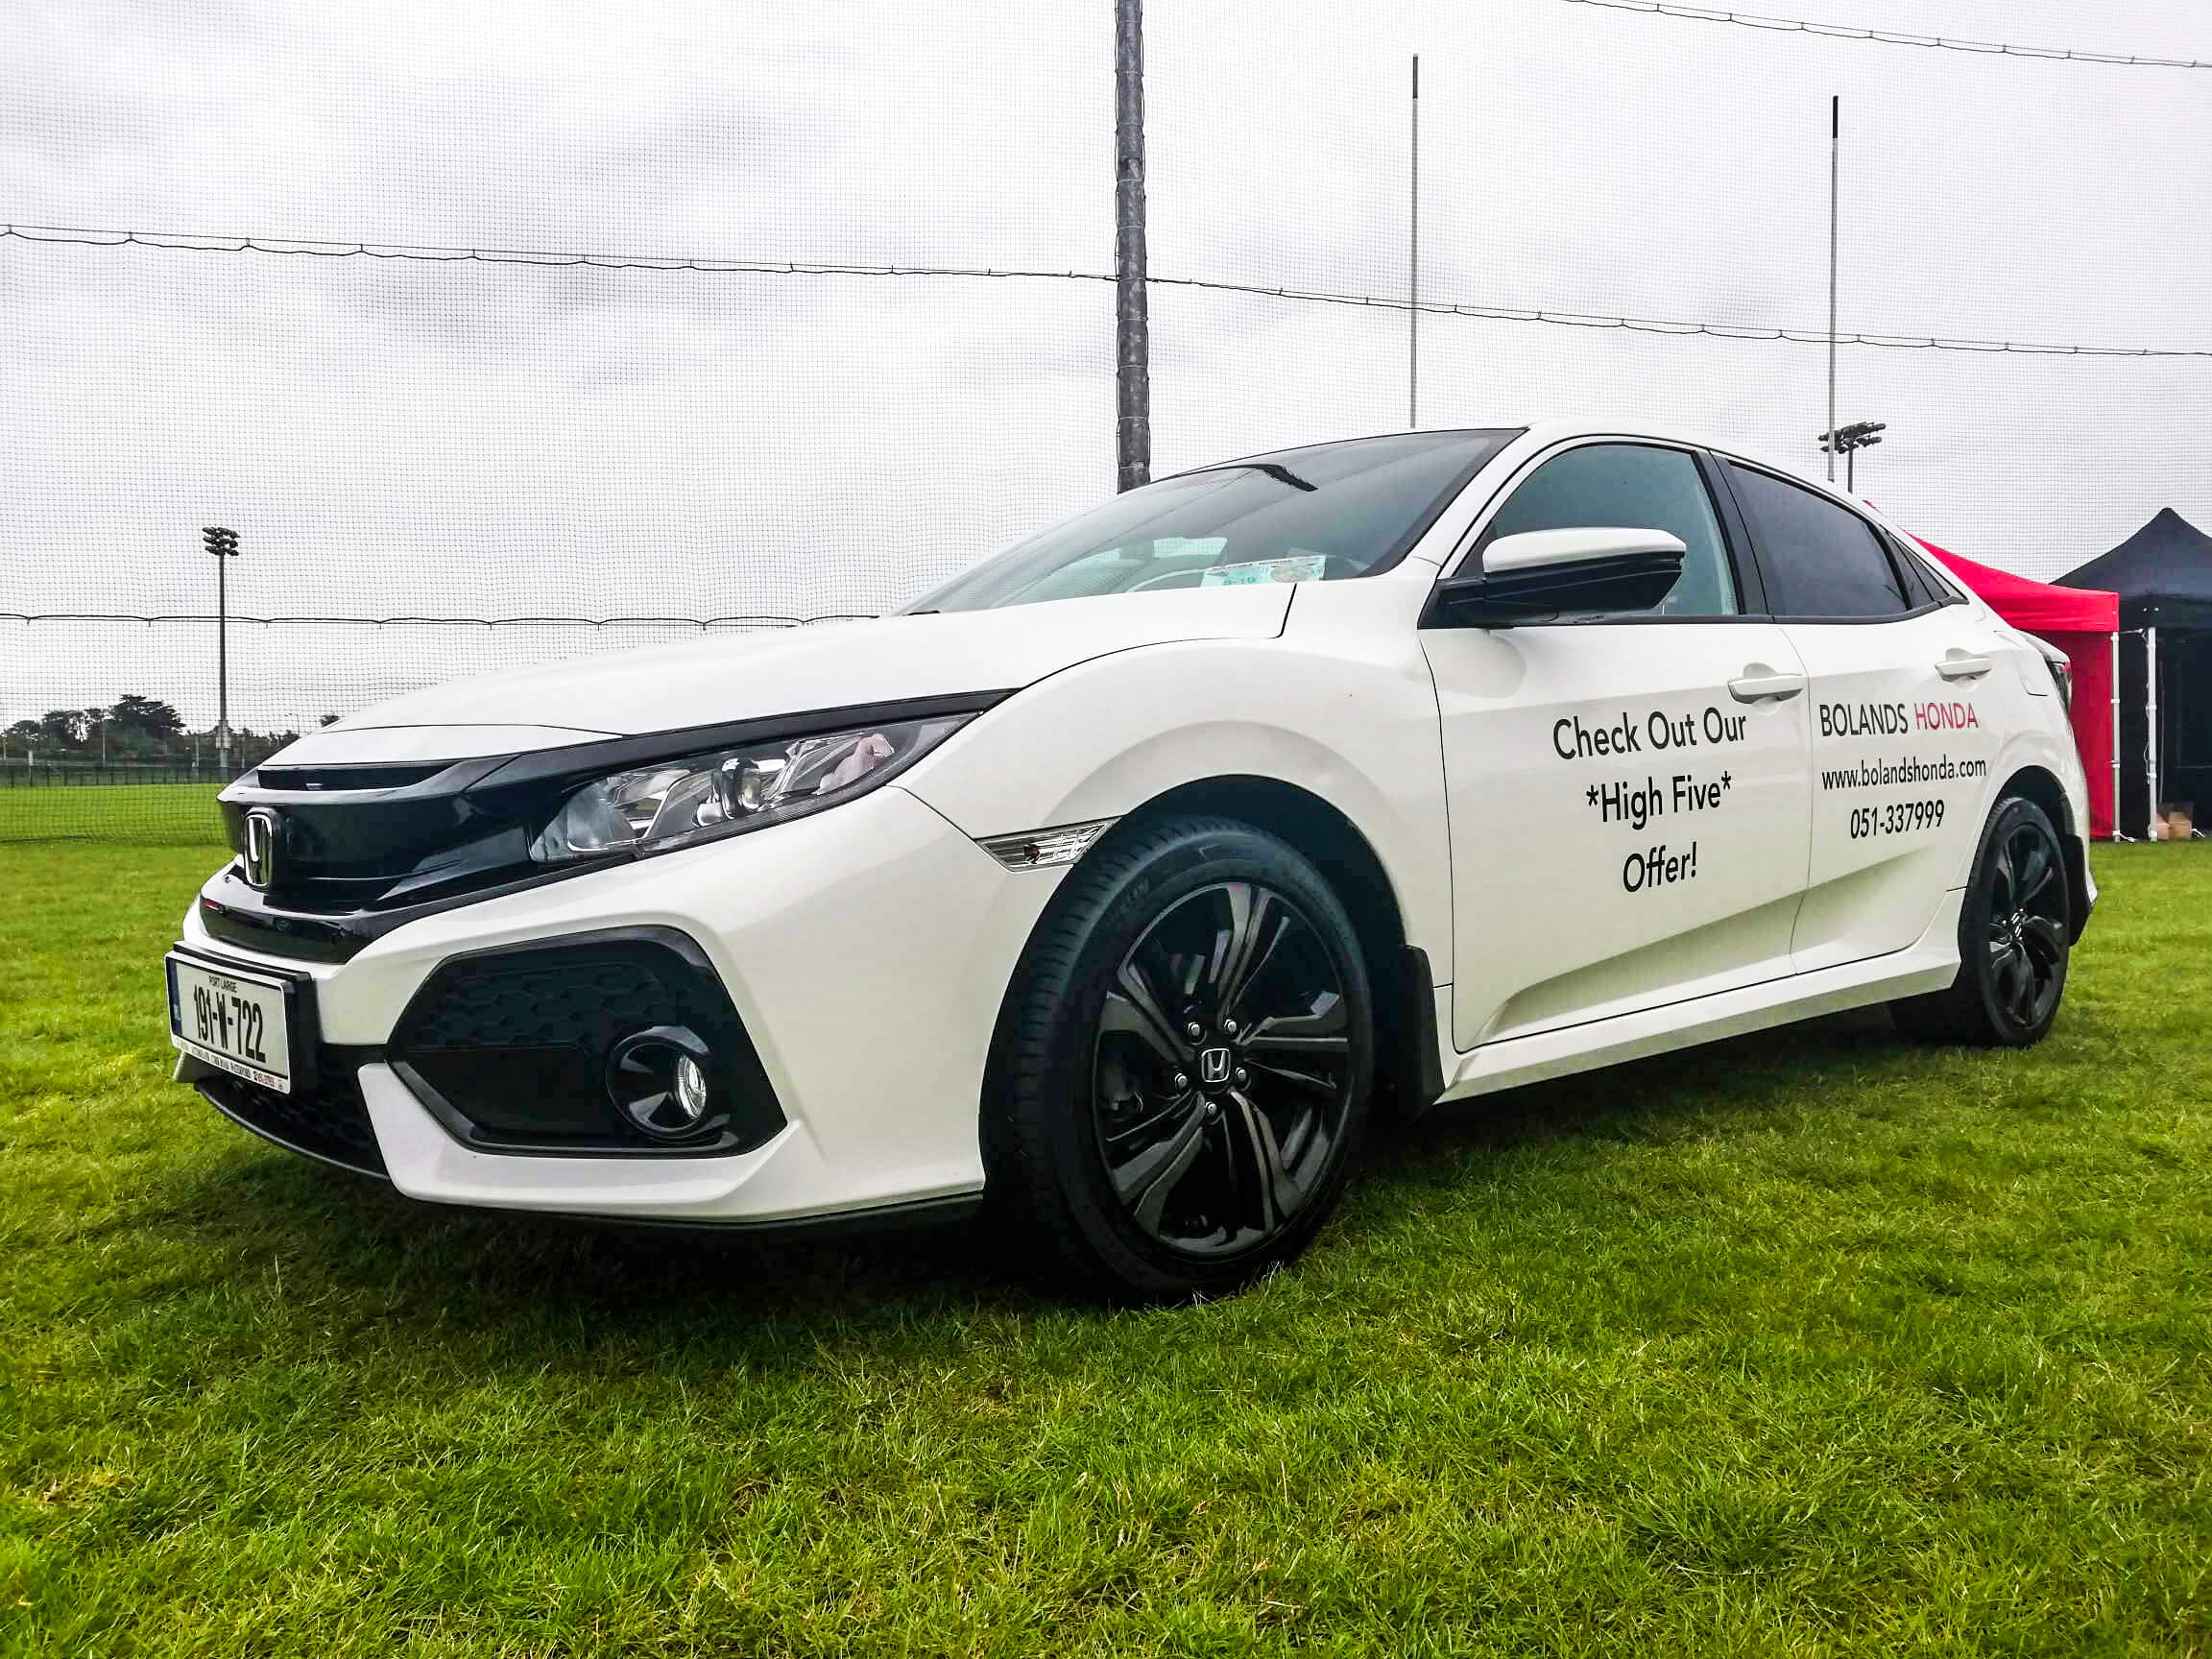 Bolands Honda Centre at Waterford Motor Show 2019